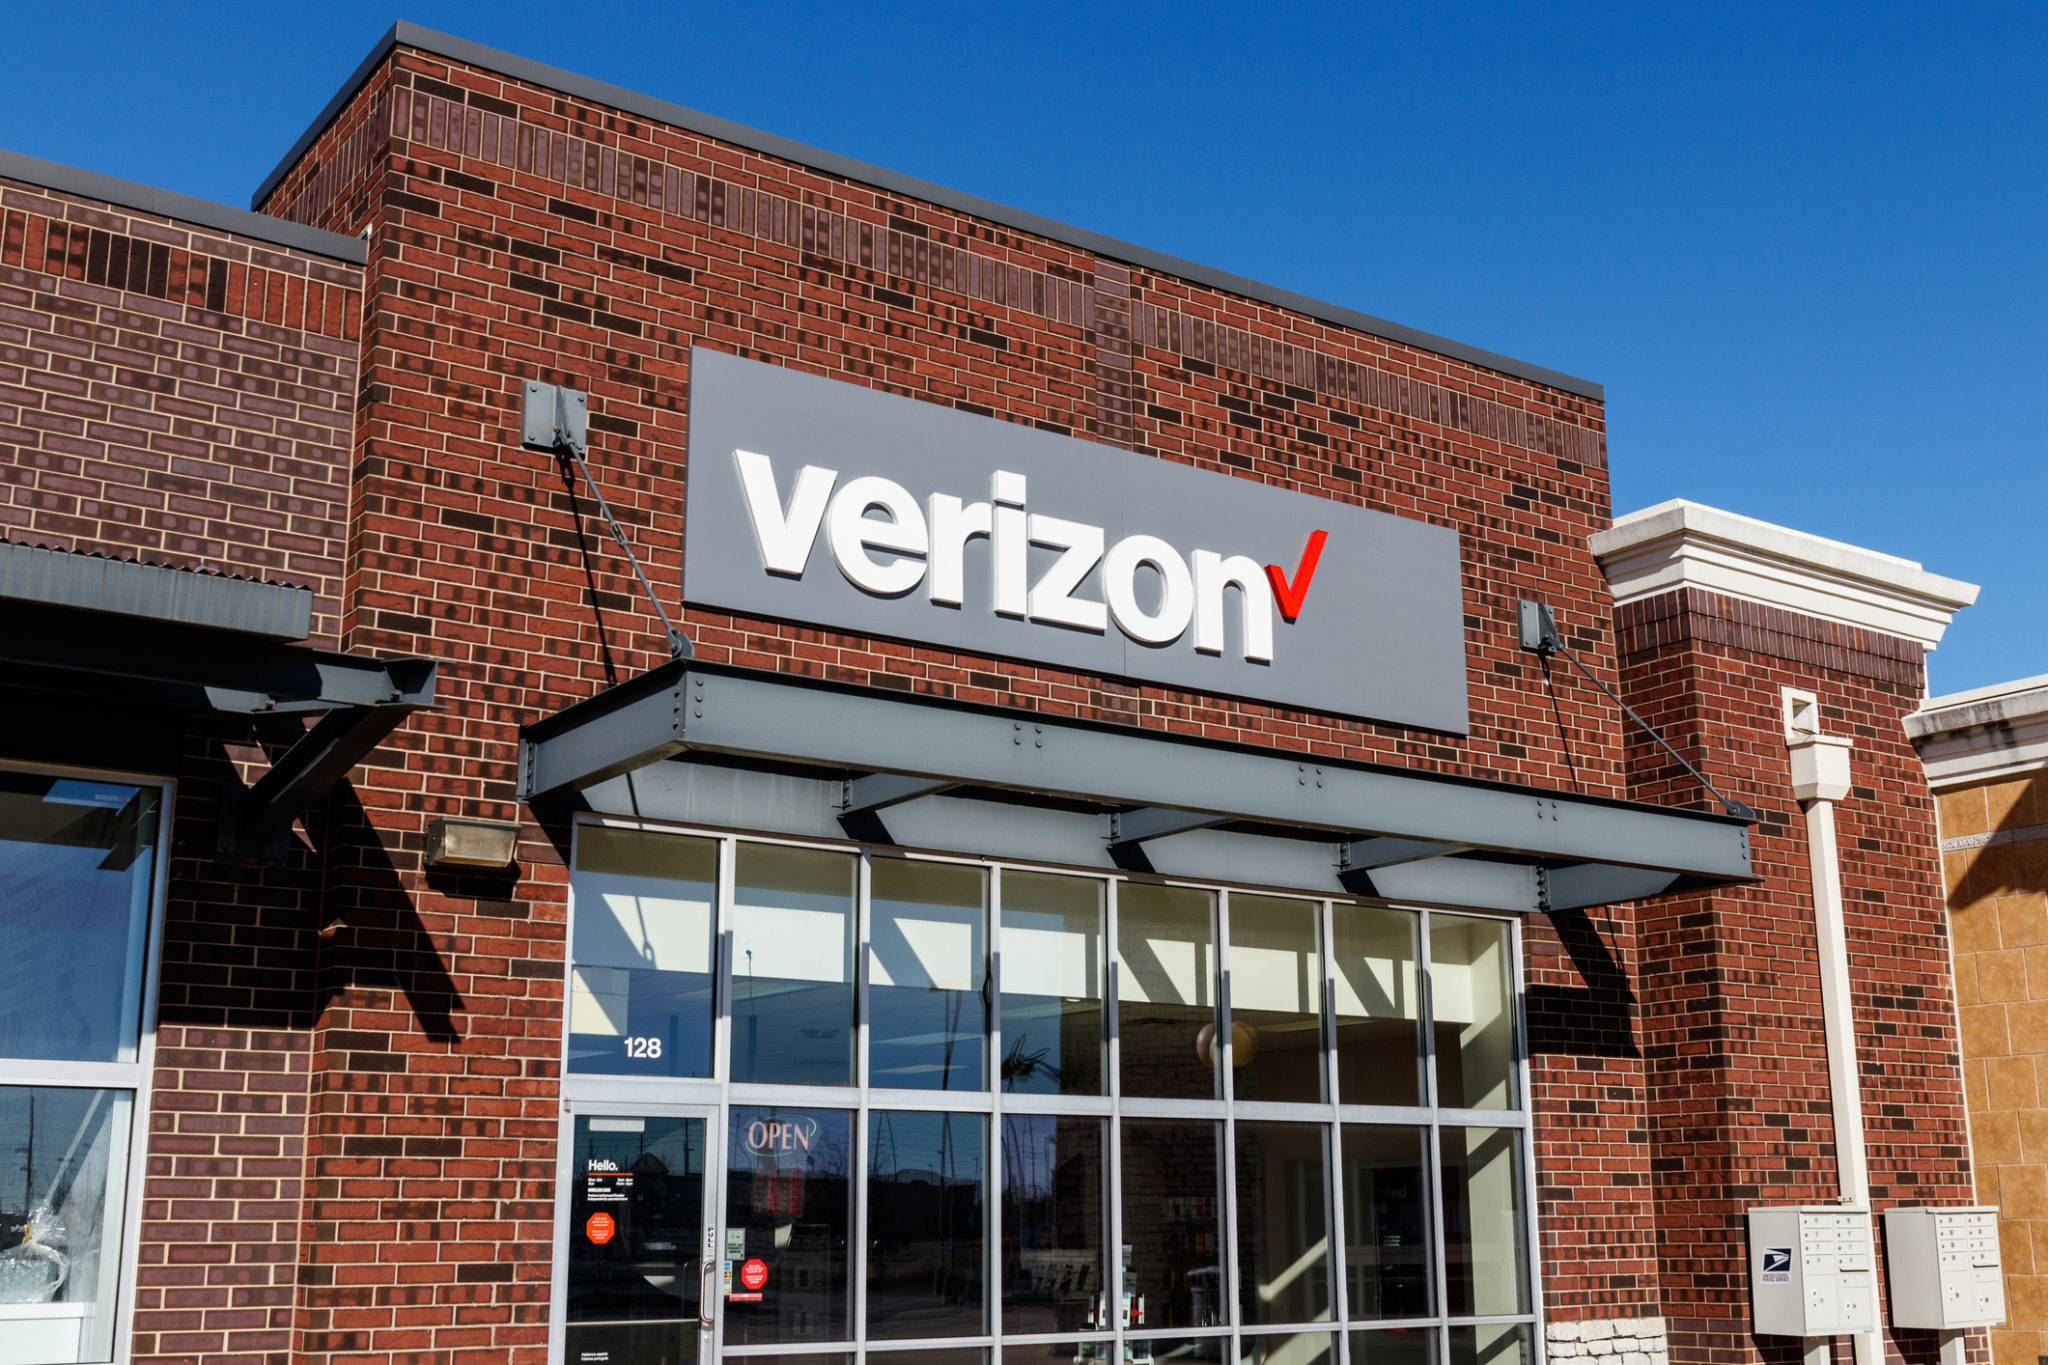 Verizon Lost 62,000 Pay TV Subscribers in Q2 2021